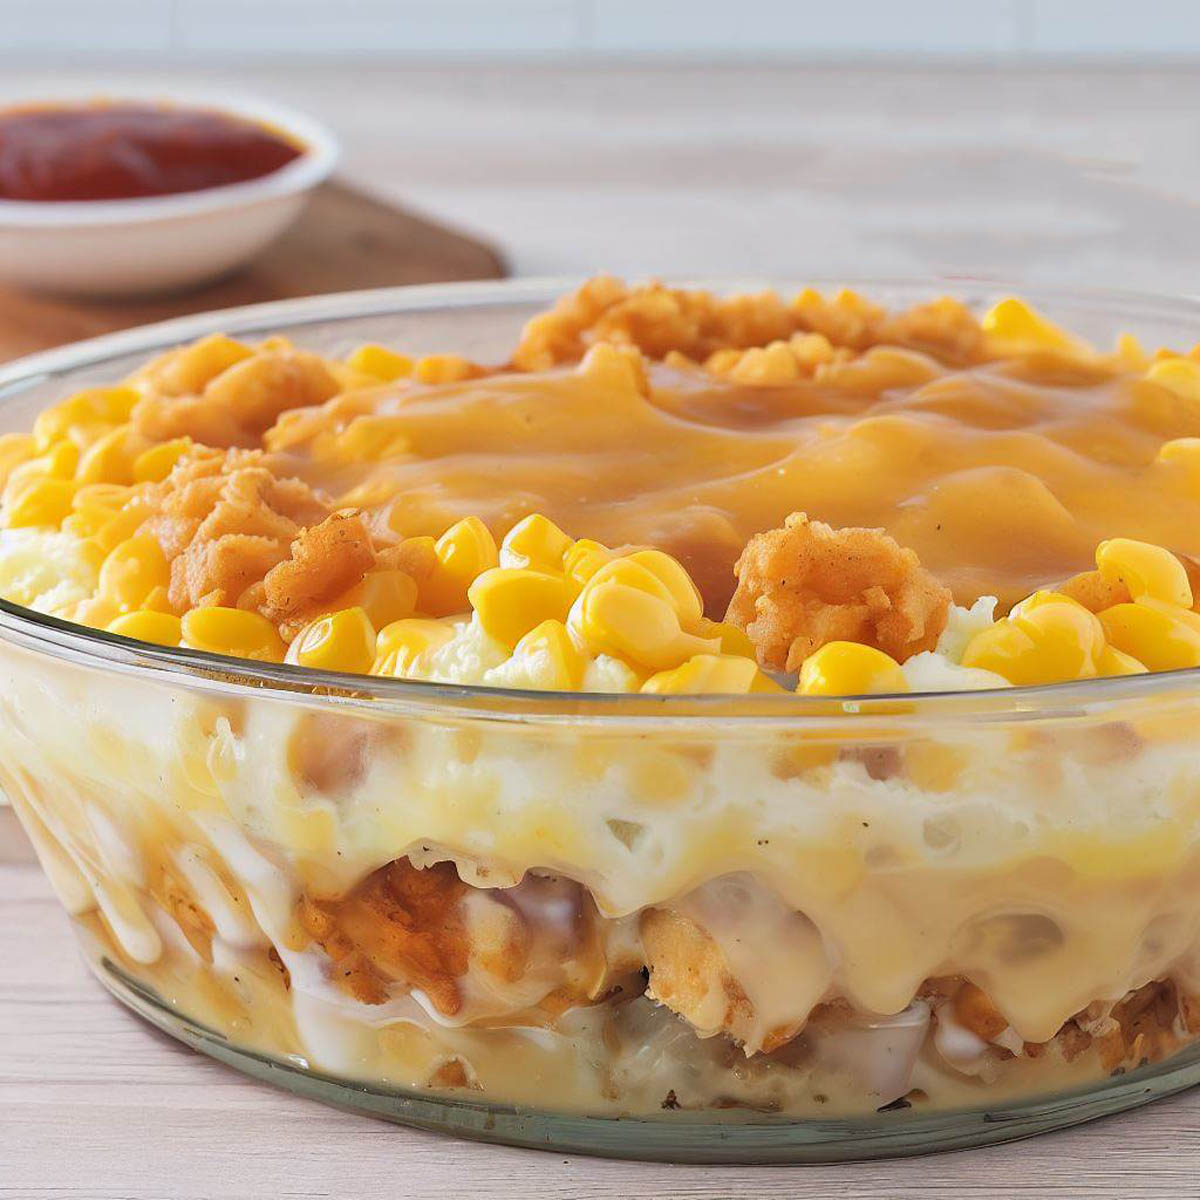 Side view of a KFC Famous Bowl Casserole showing the delicious layers.